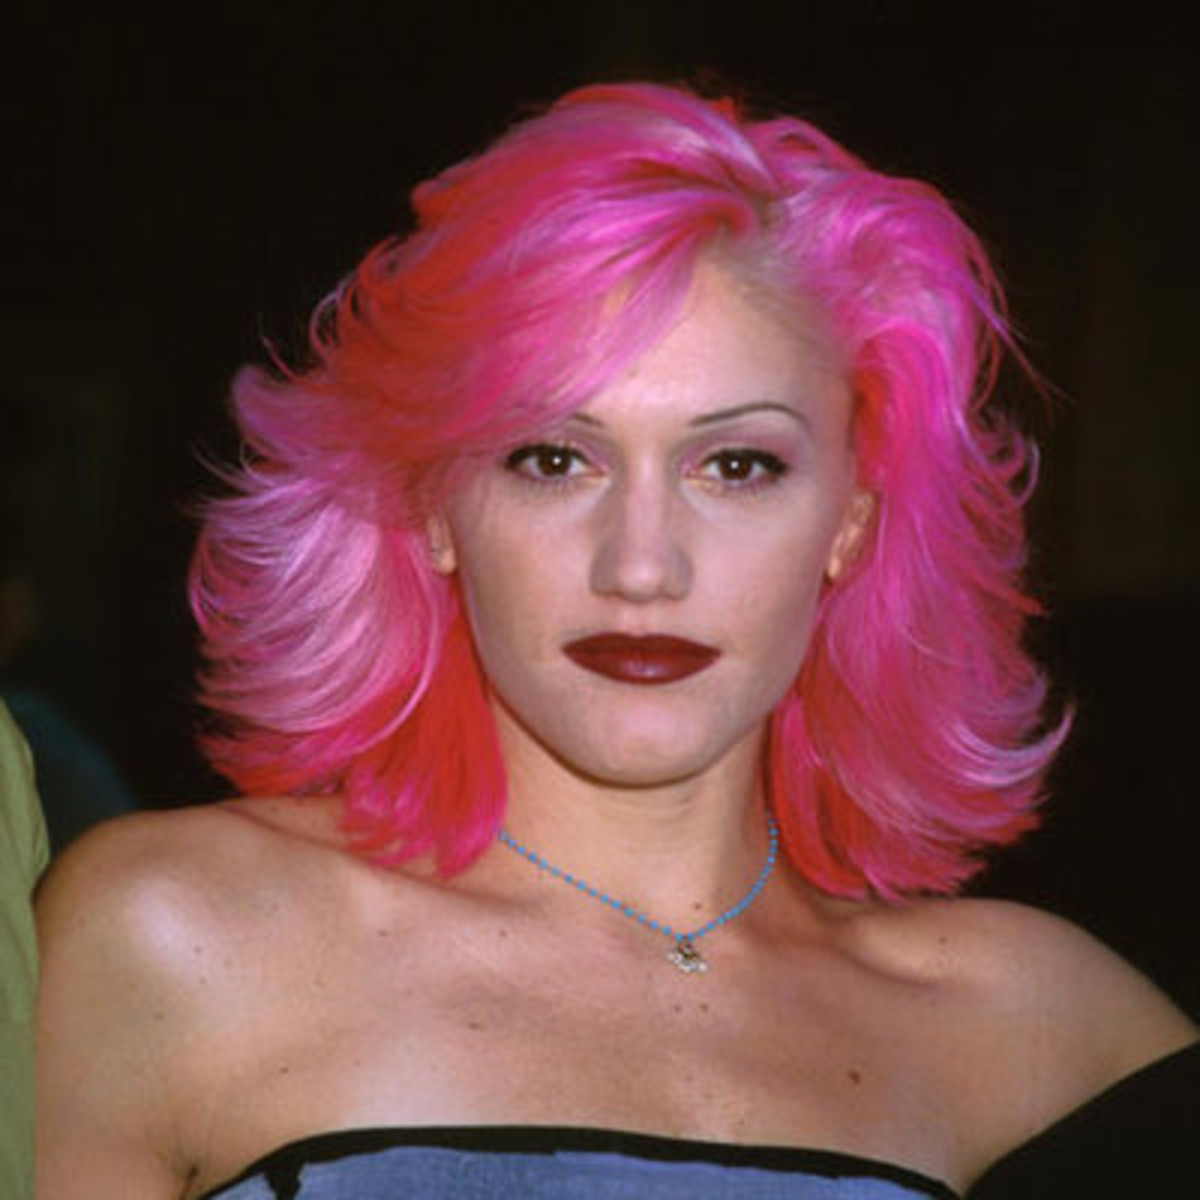 A Young Gwen Stefani with the Perfect Flip Hairdo in a Hot Pink Hair Color